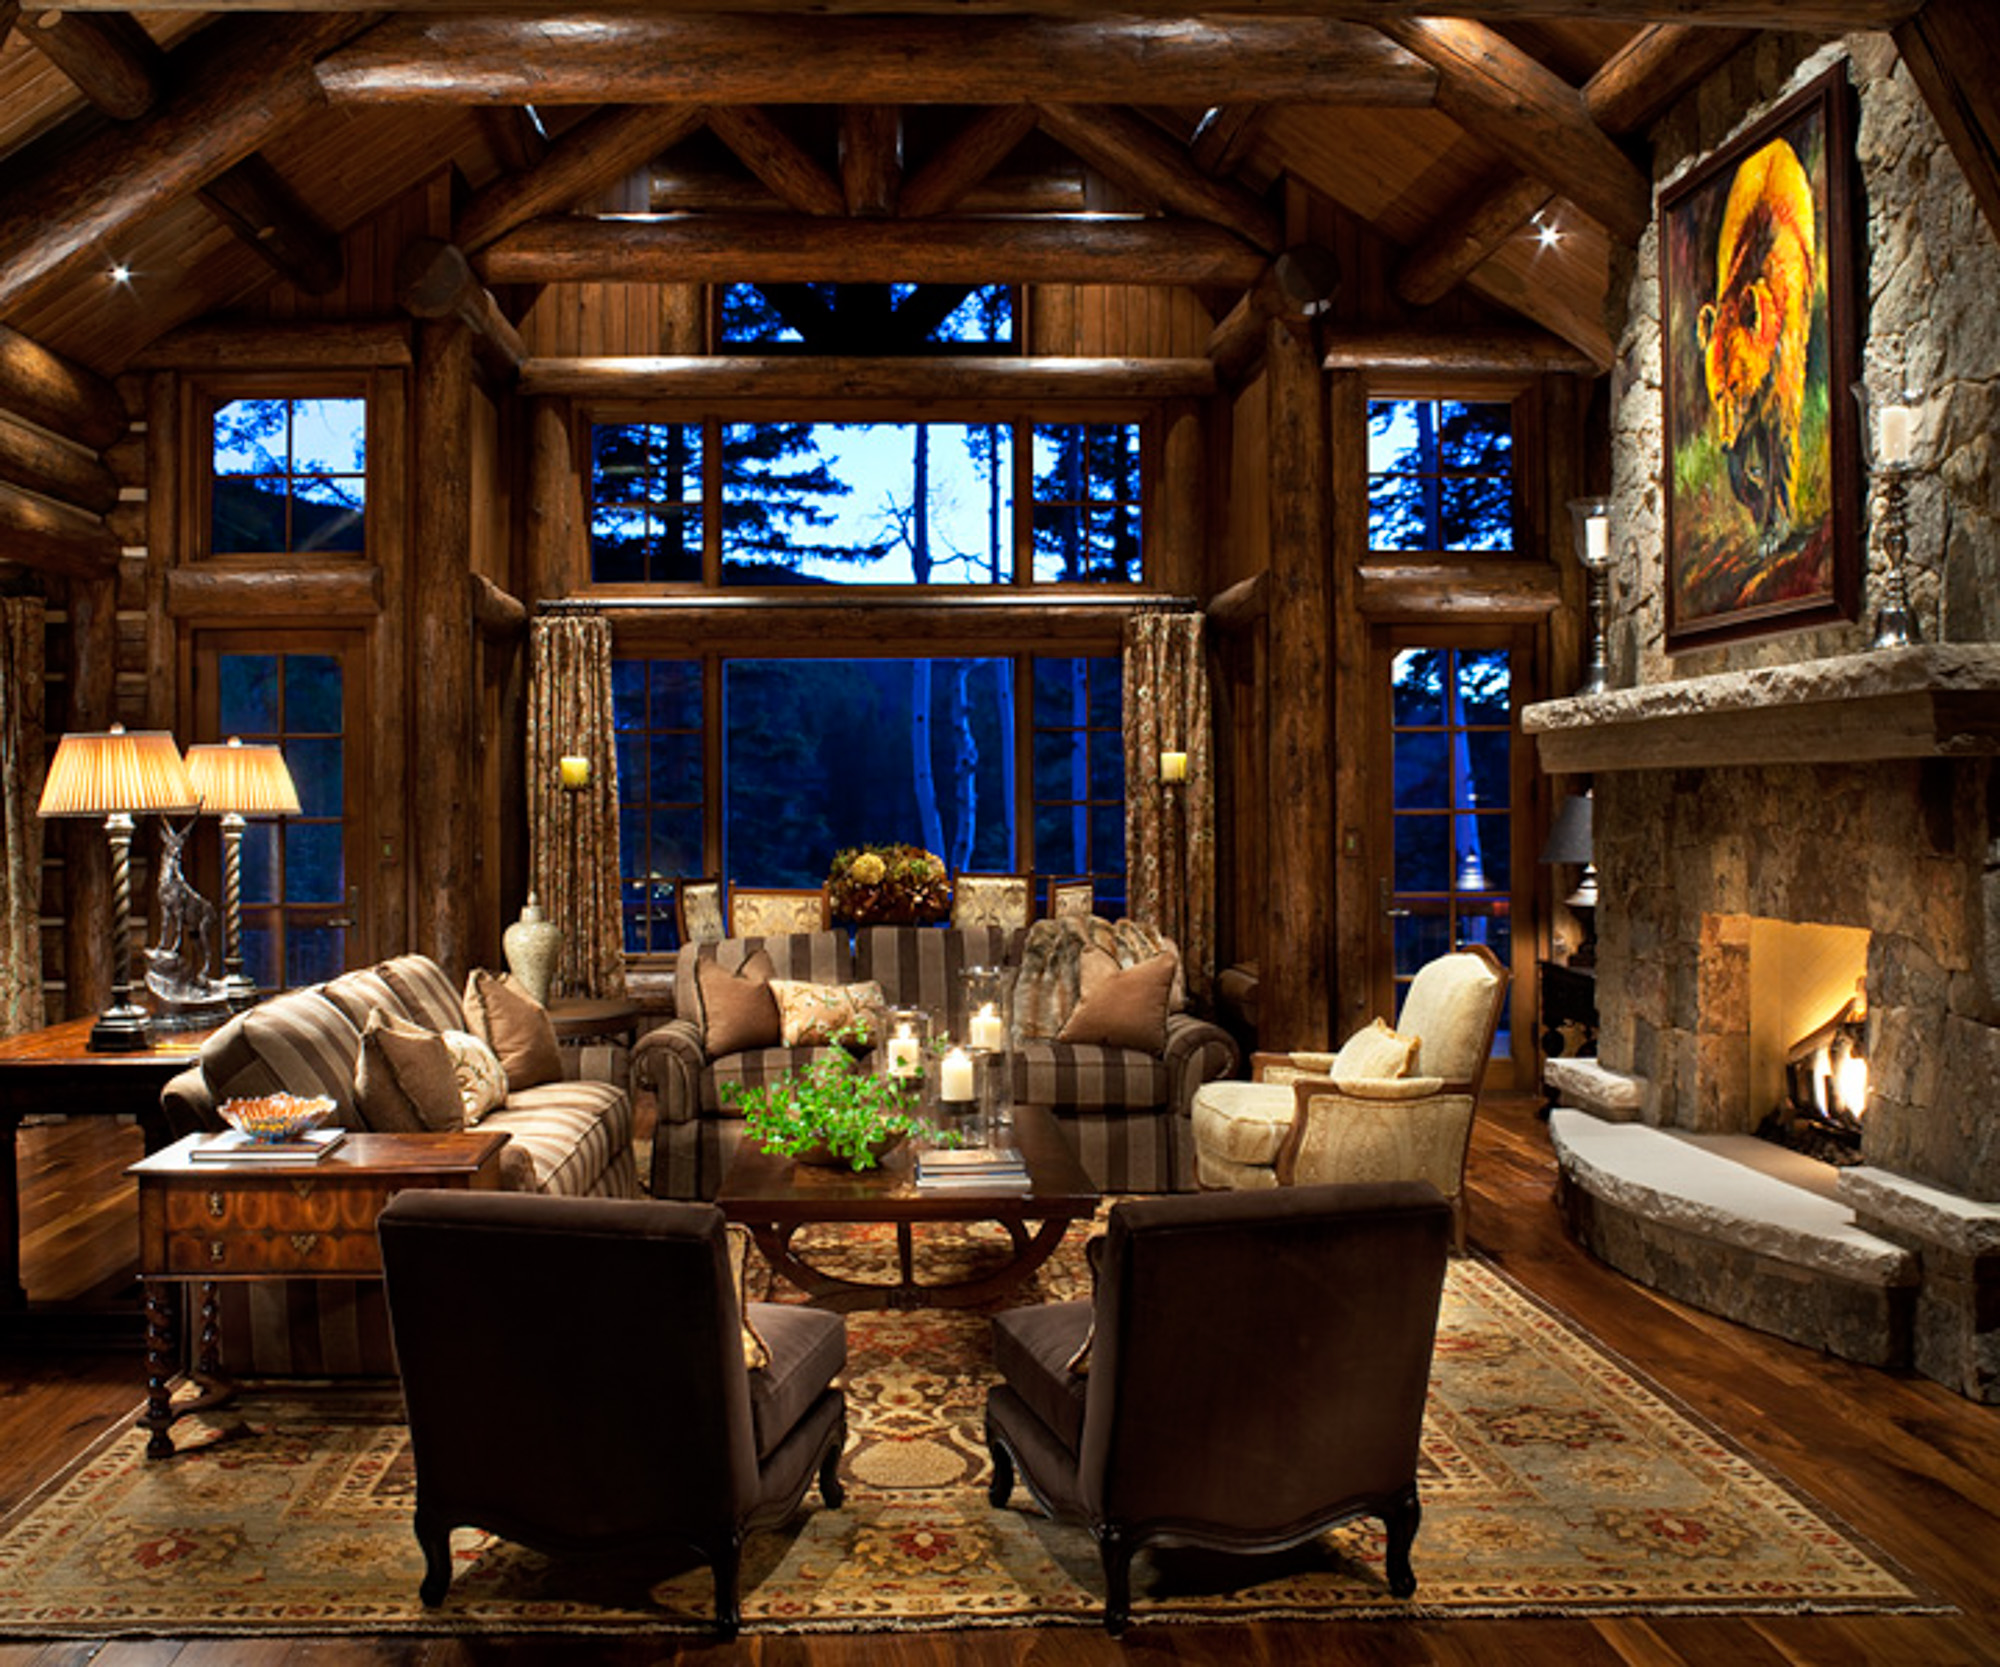 A view of a living room with stone fireplace and large windows at bachelor gulch